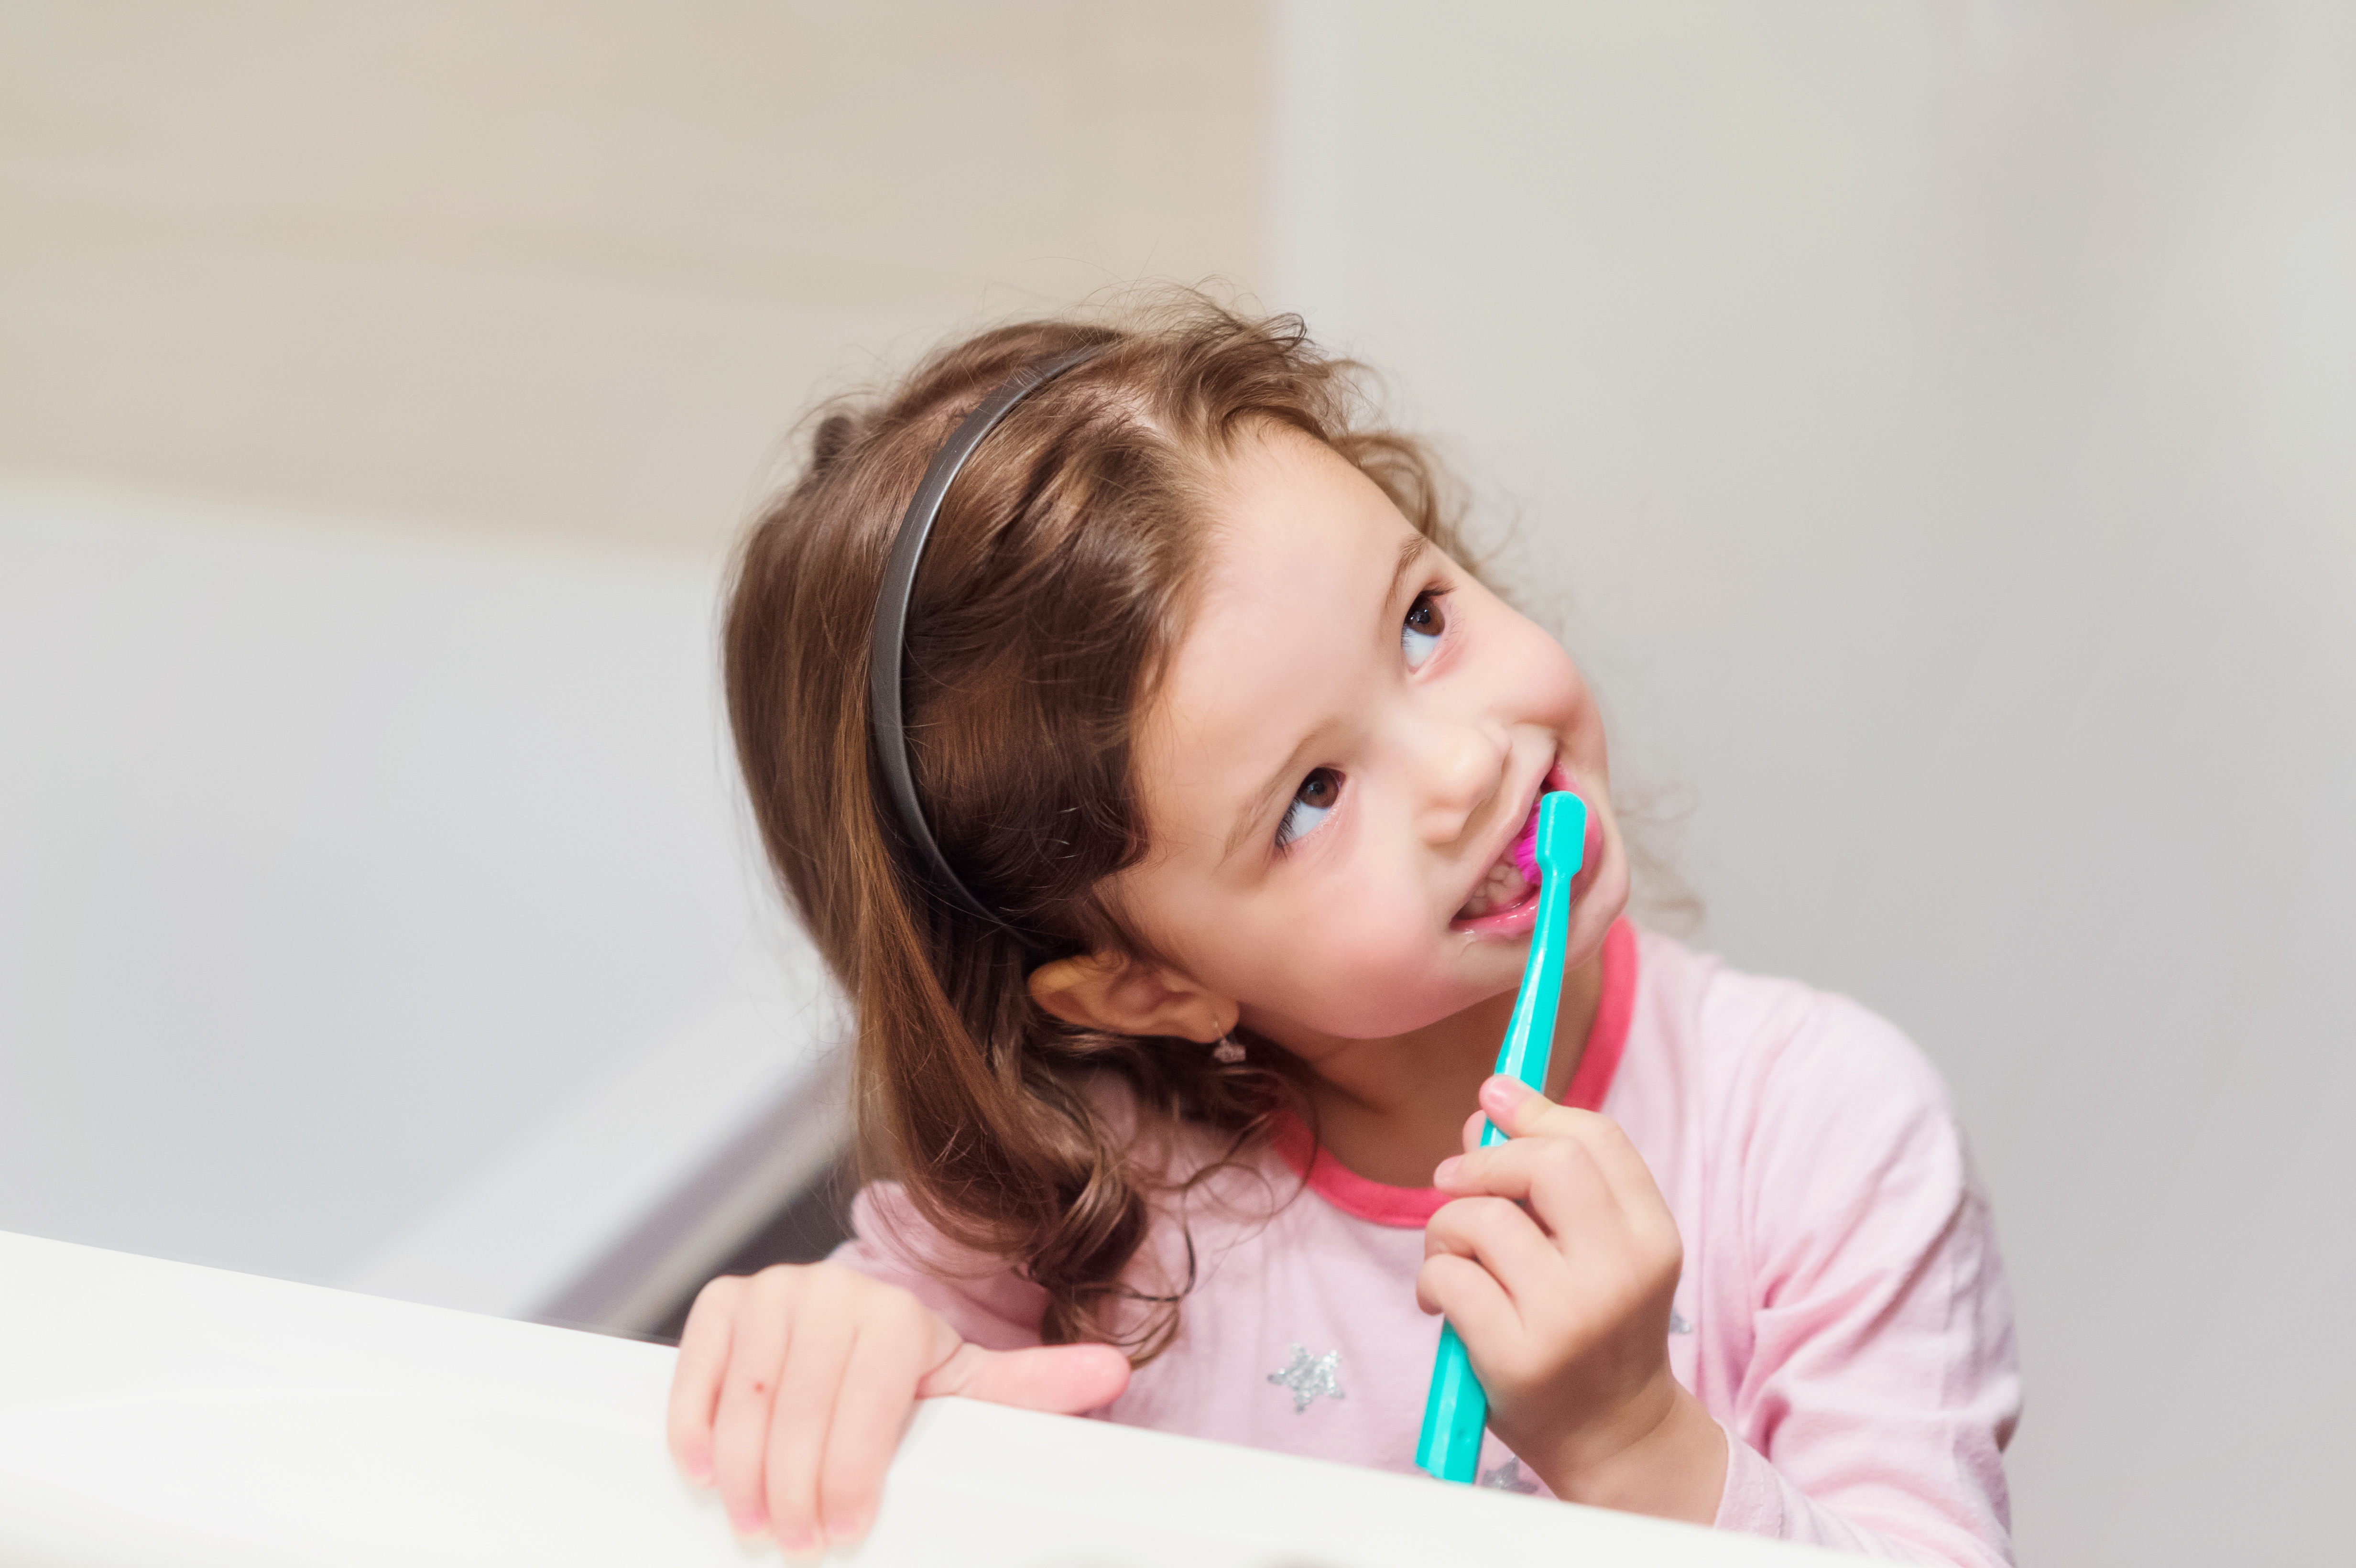 Everything you need to know about your child’s first visit to the dentist